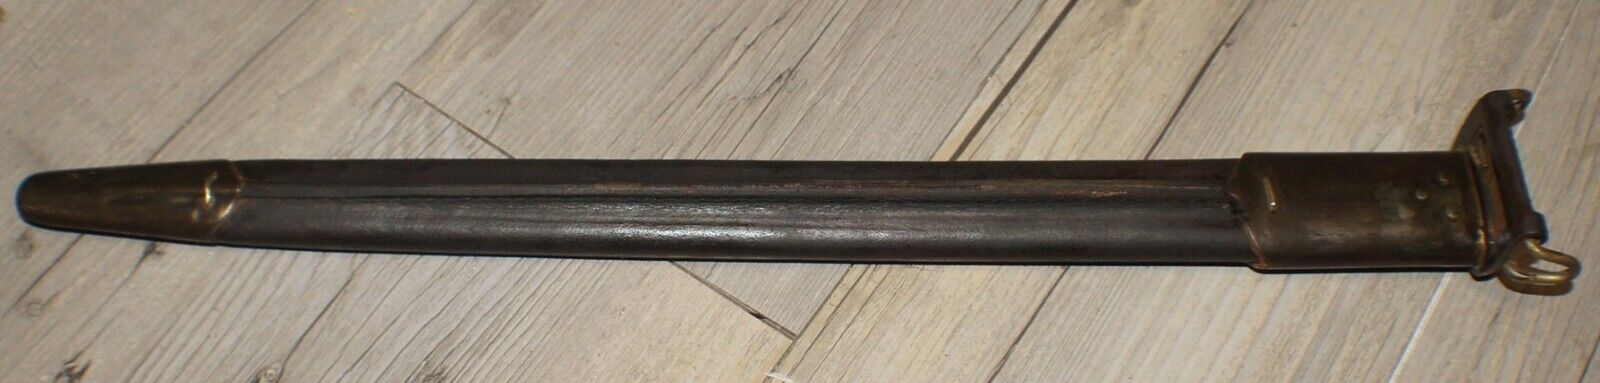 WWI US ARMY M1917 ENFIELD REMINGTON TRENCH BAYONET CARRY SCABBARD -REPRODUCTION